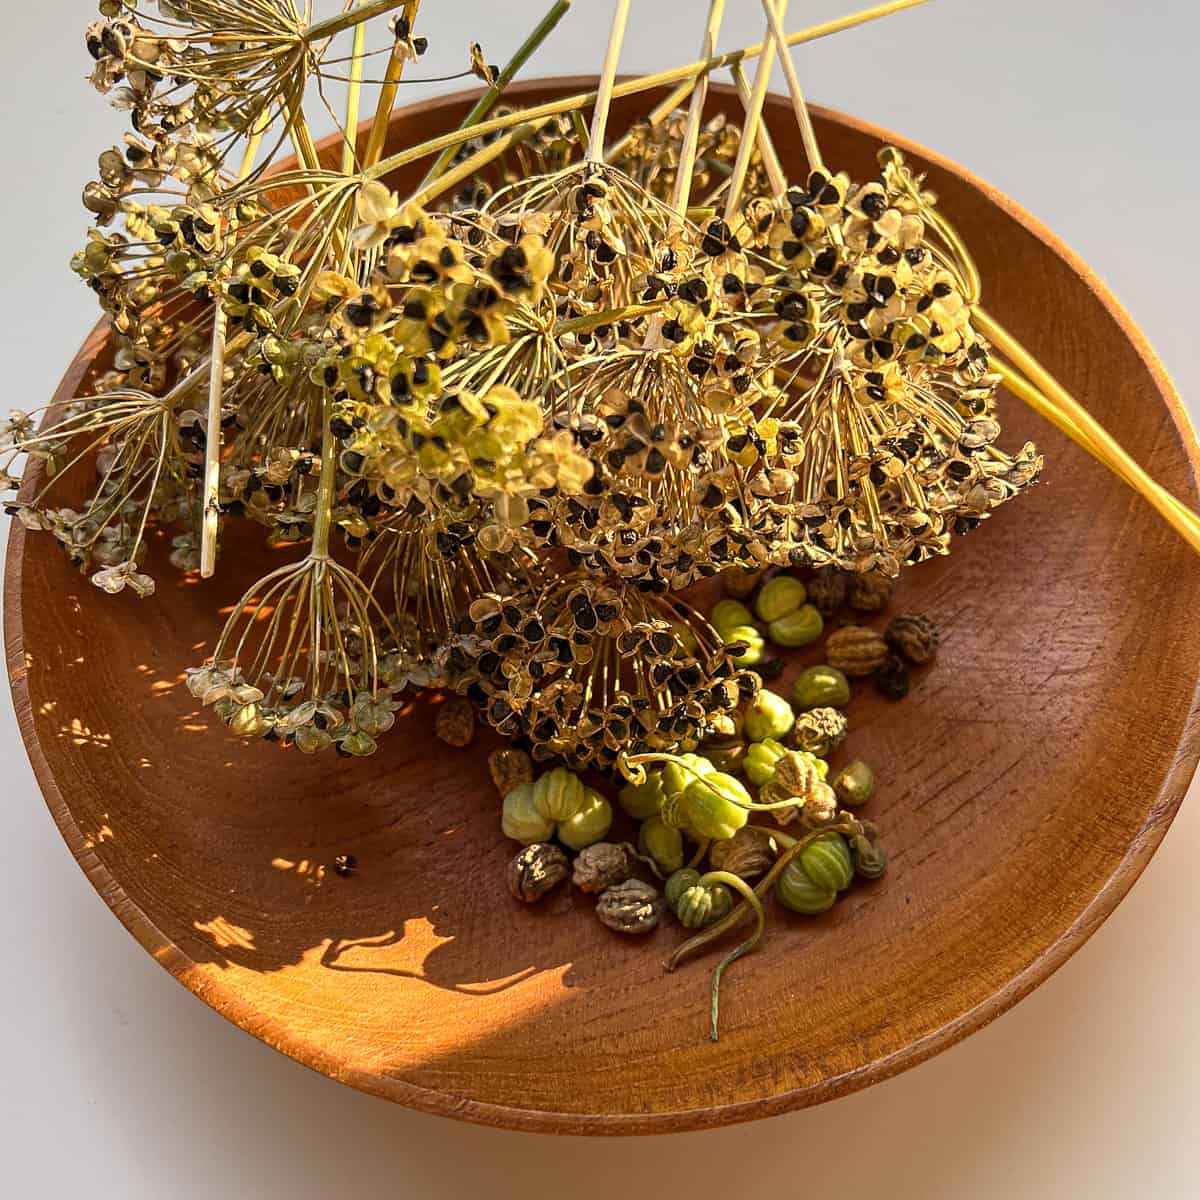 Dried seeds collected from a Square Foot Garden.